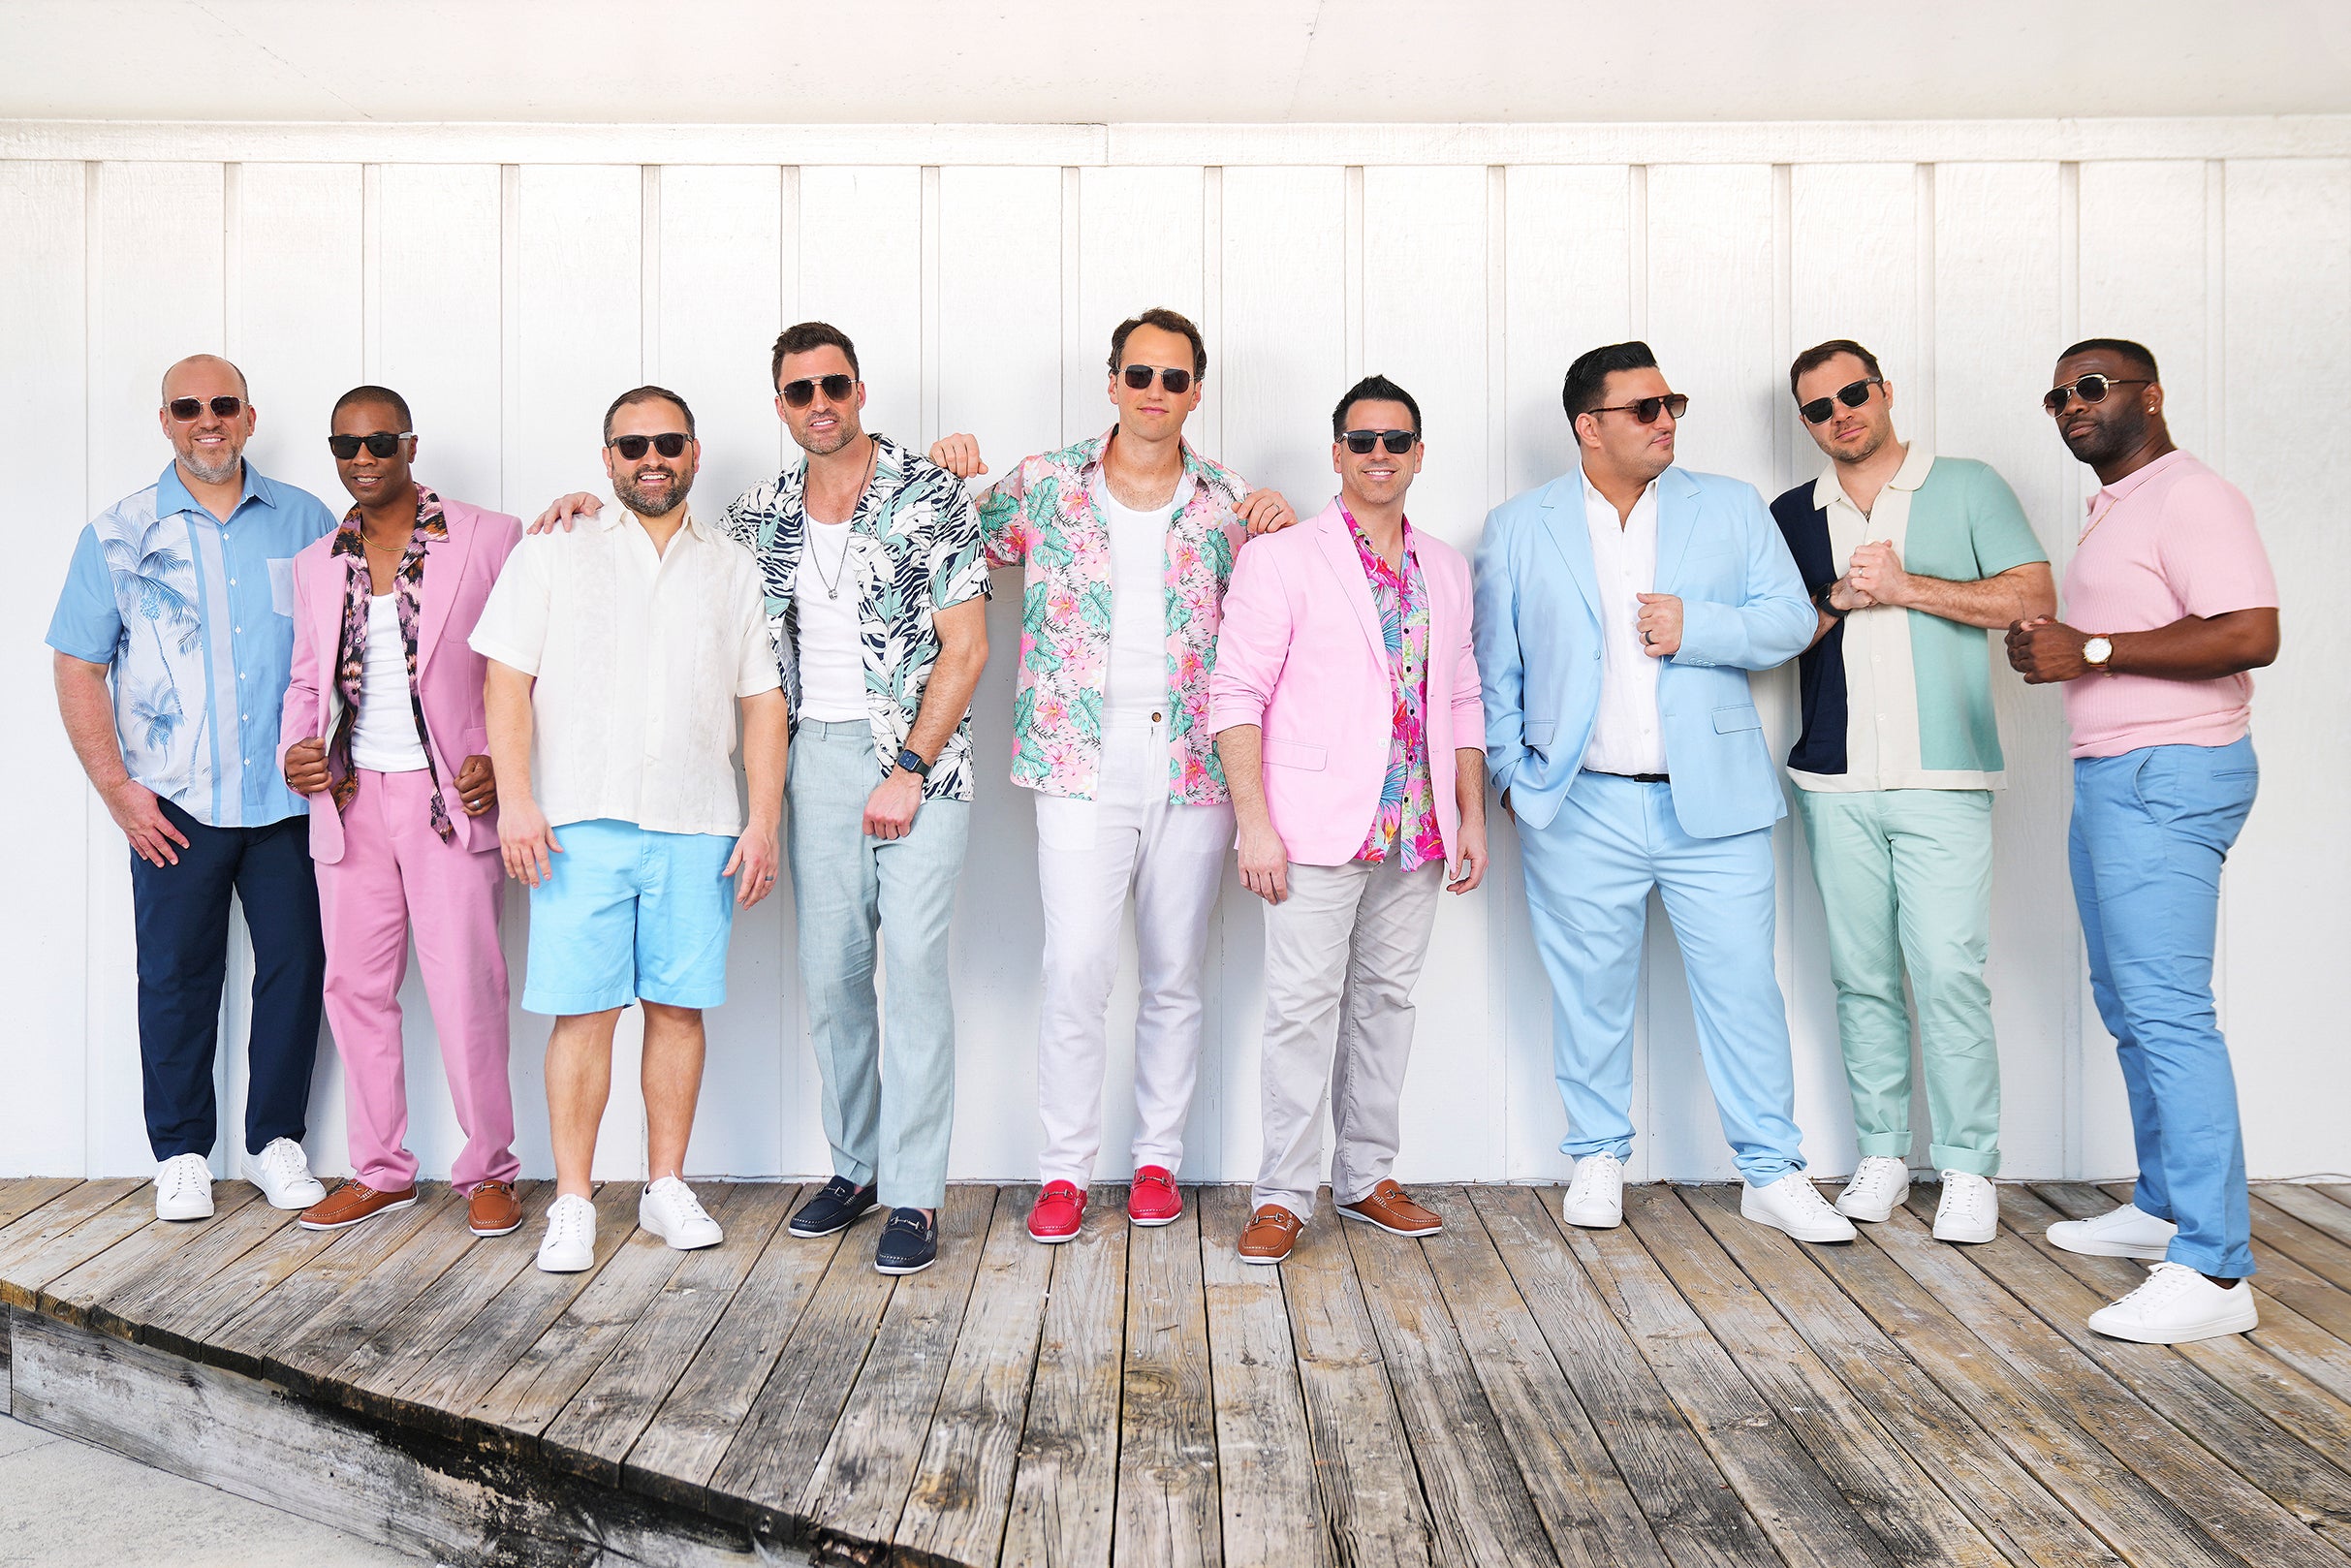 Straight No Chaser Summer: The 90's free pre-sale info for performance tickets in Anaheim, CA (City National Grove of Anaheim)